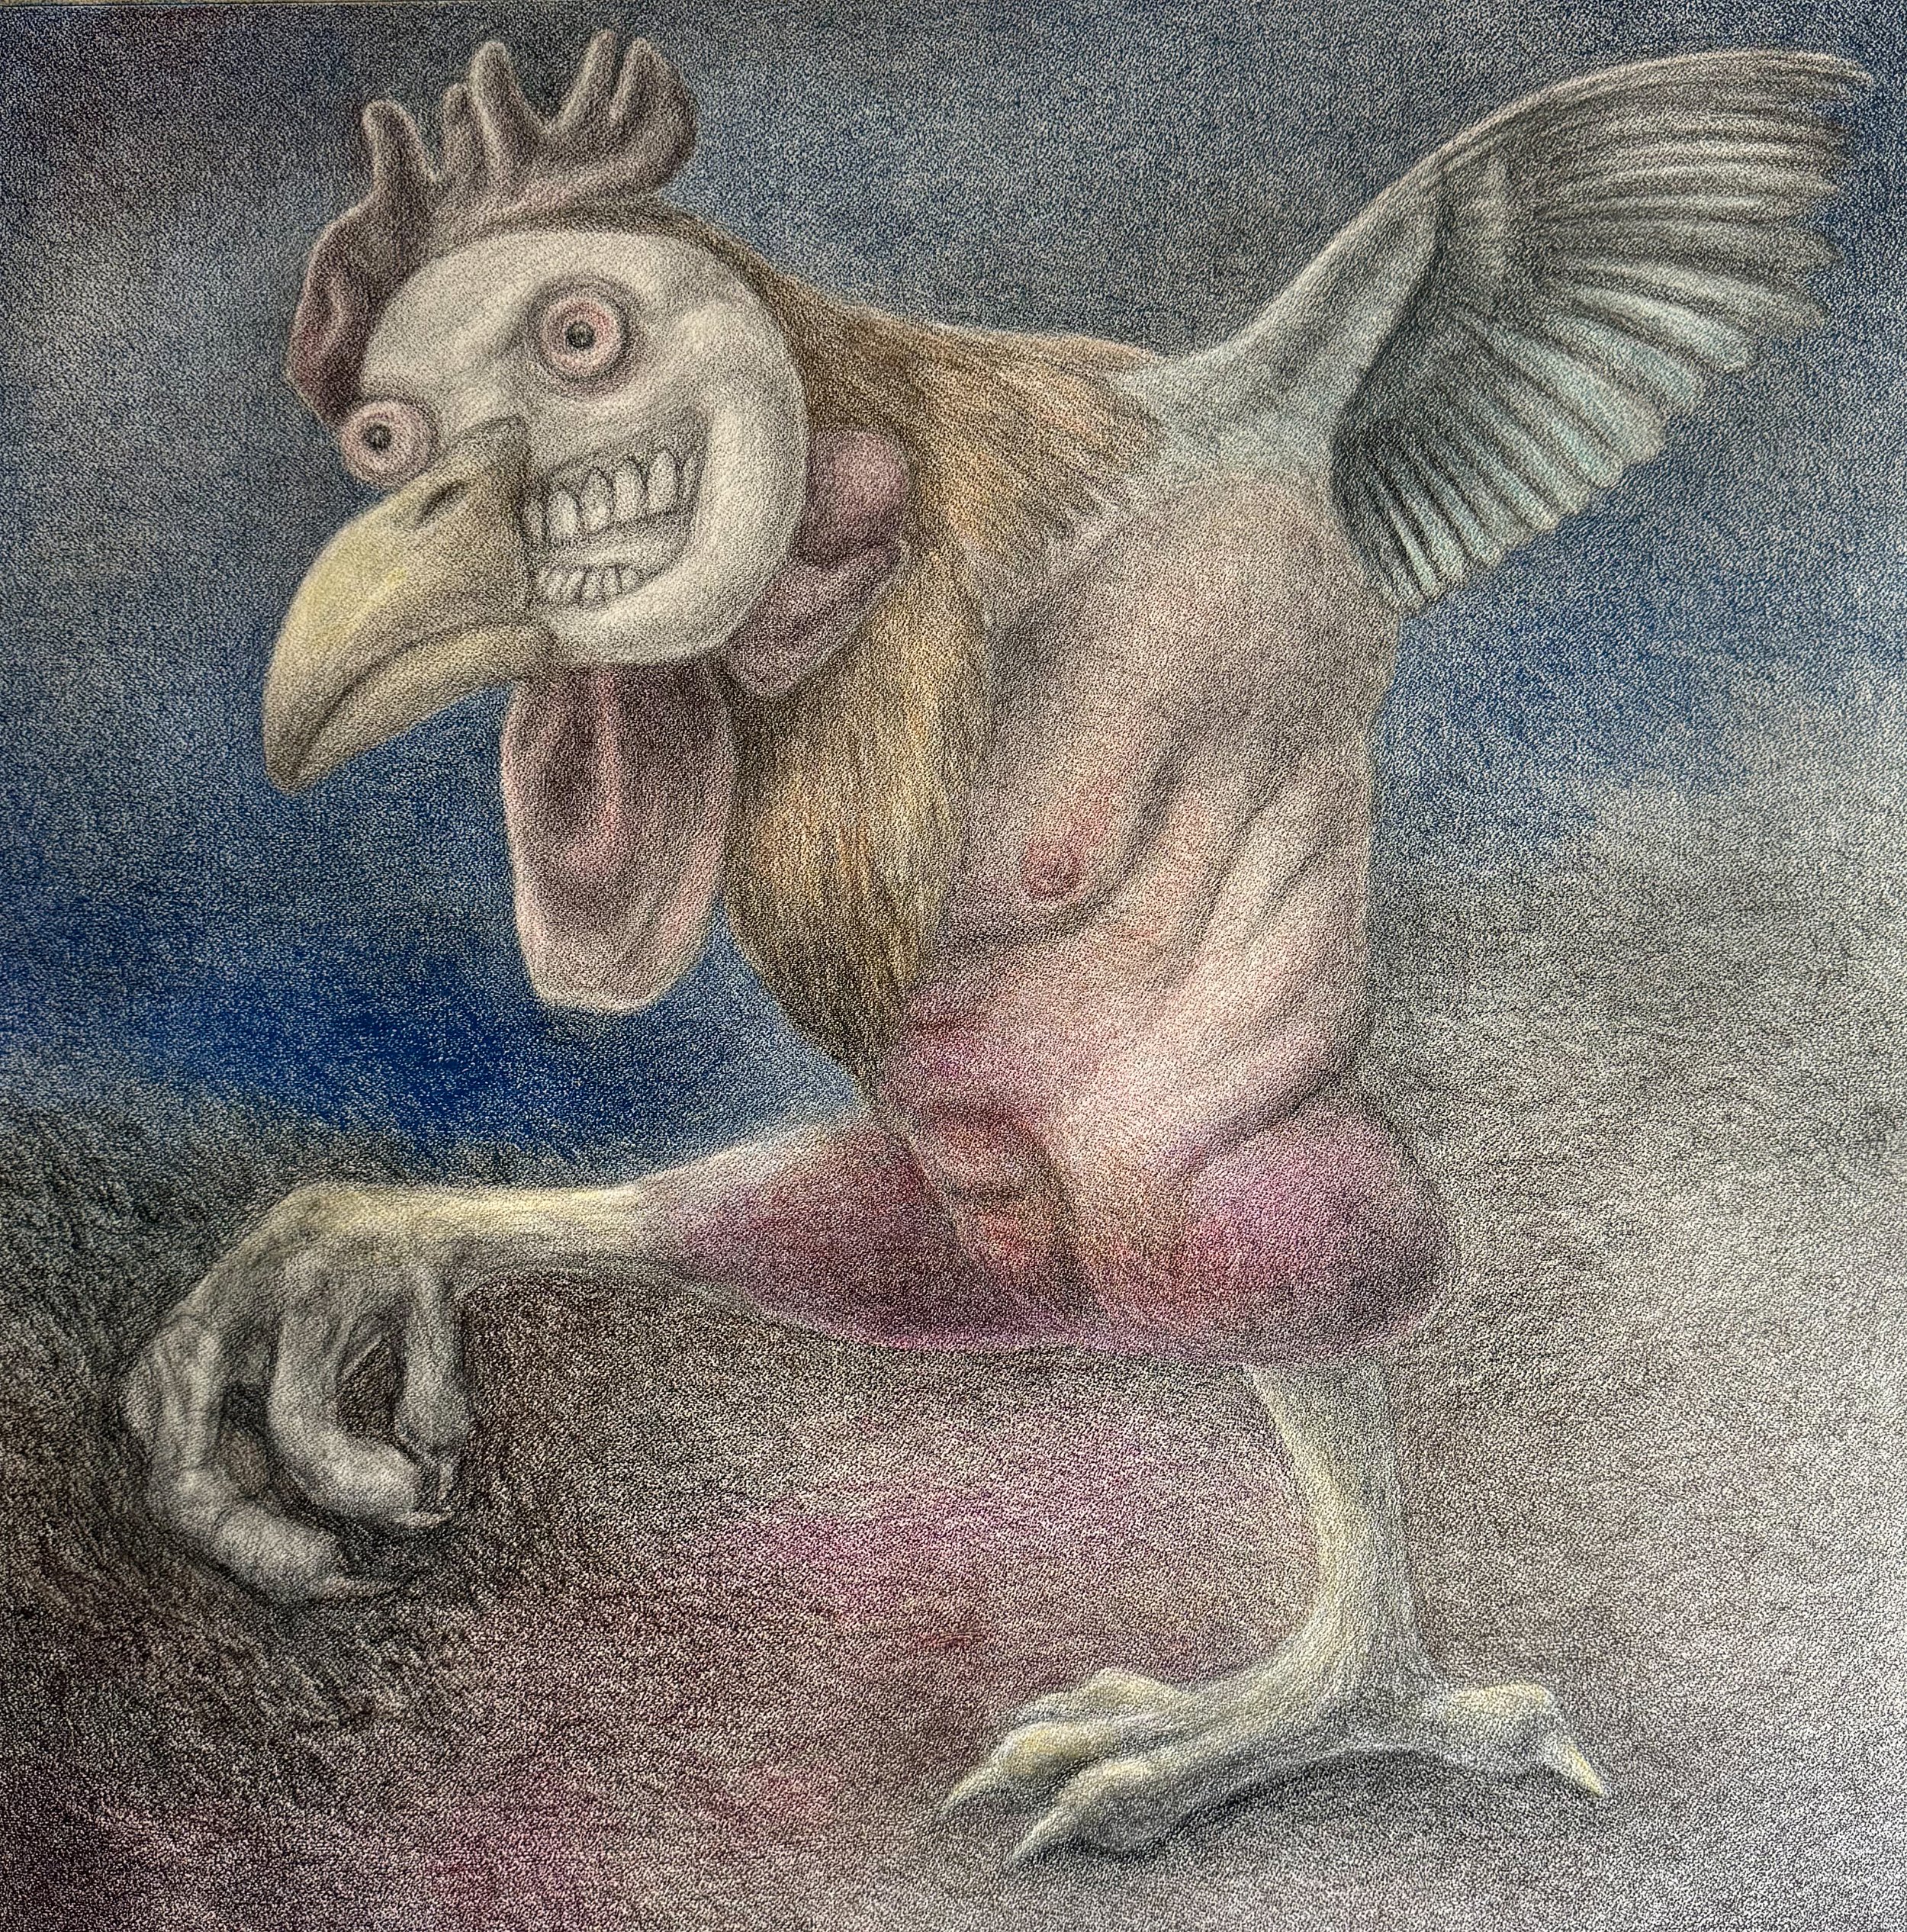 Crazy Rooster Man 31" x 31", Colored pencil on Arches 140 lb watercolor paper